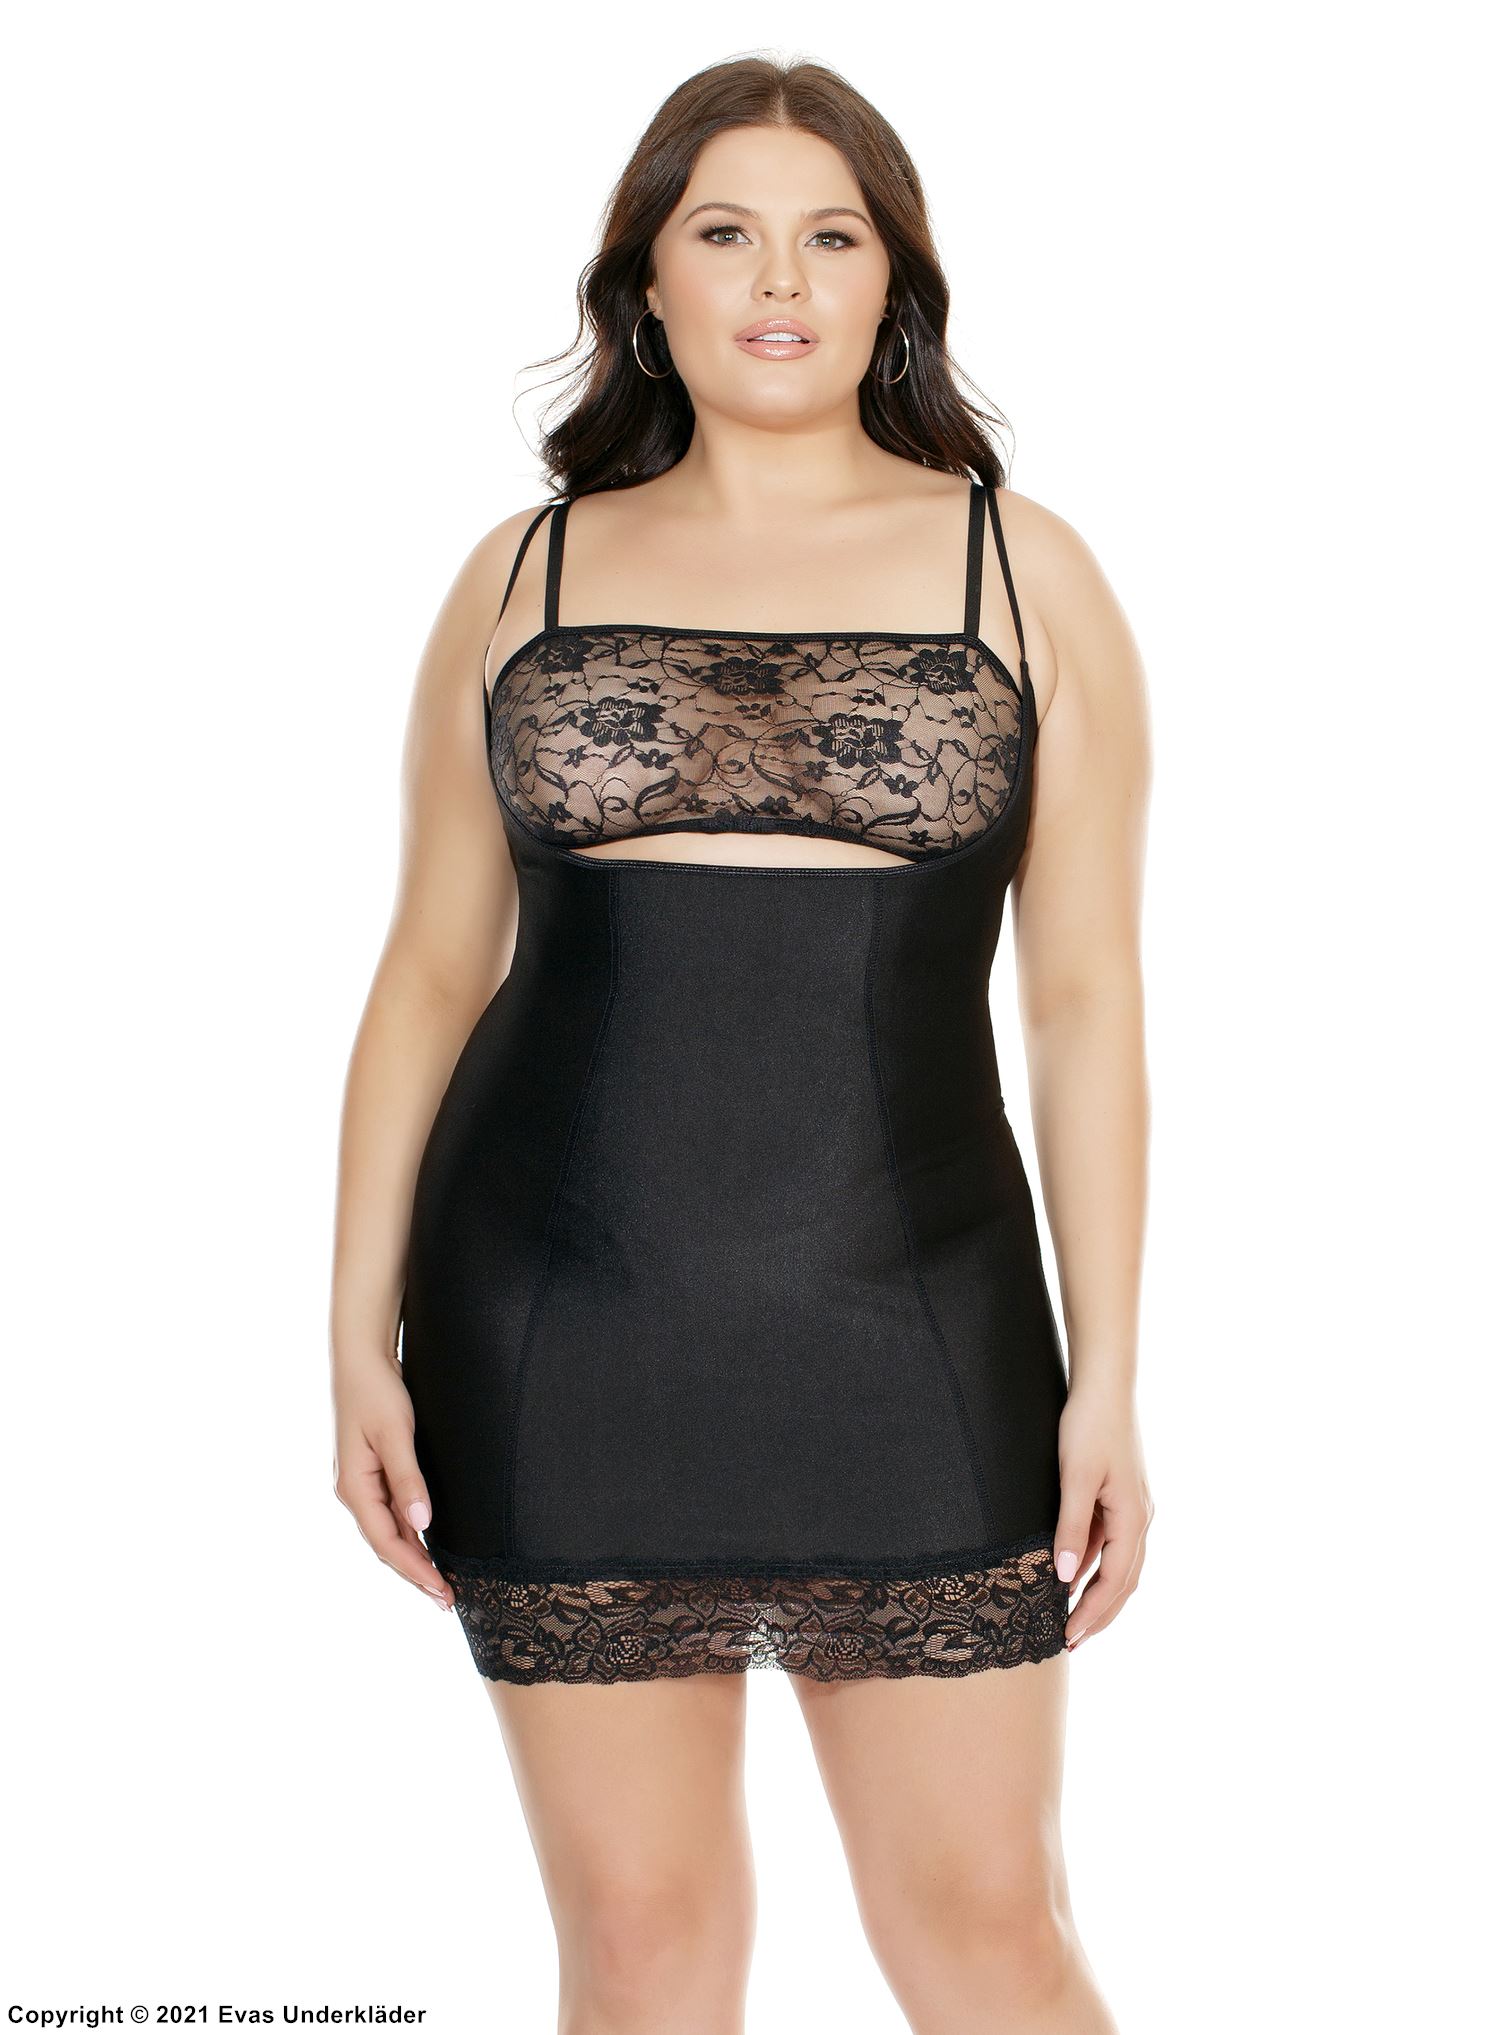 Chemise, open cups, lace edge, light shaping effect, XL to 4XL